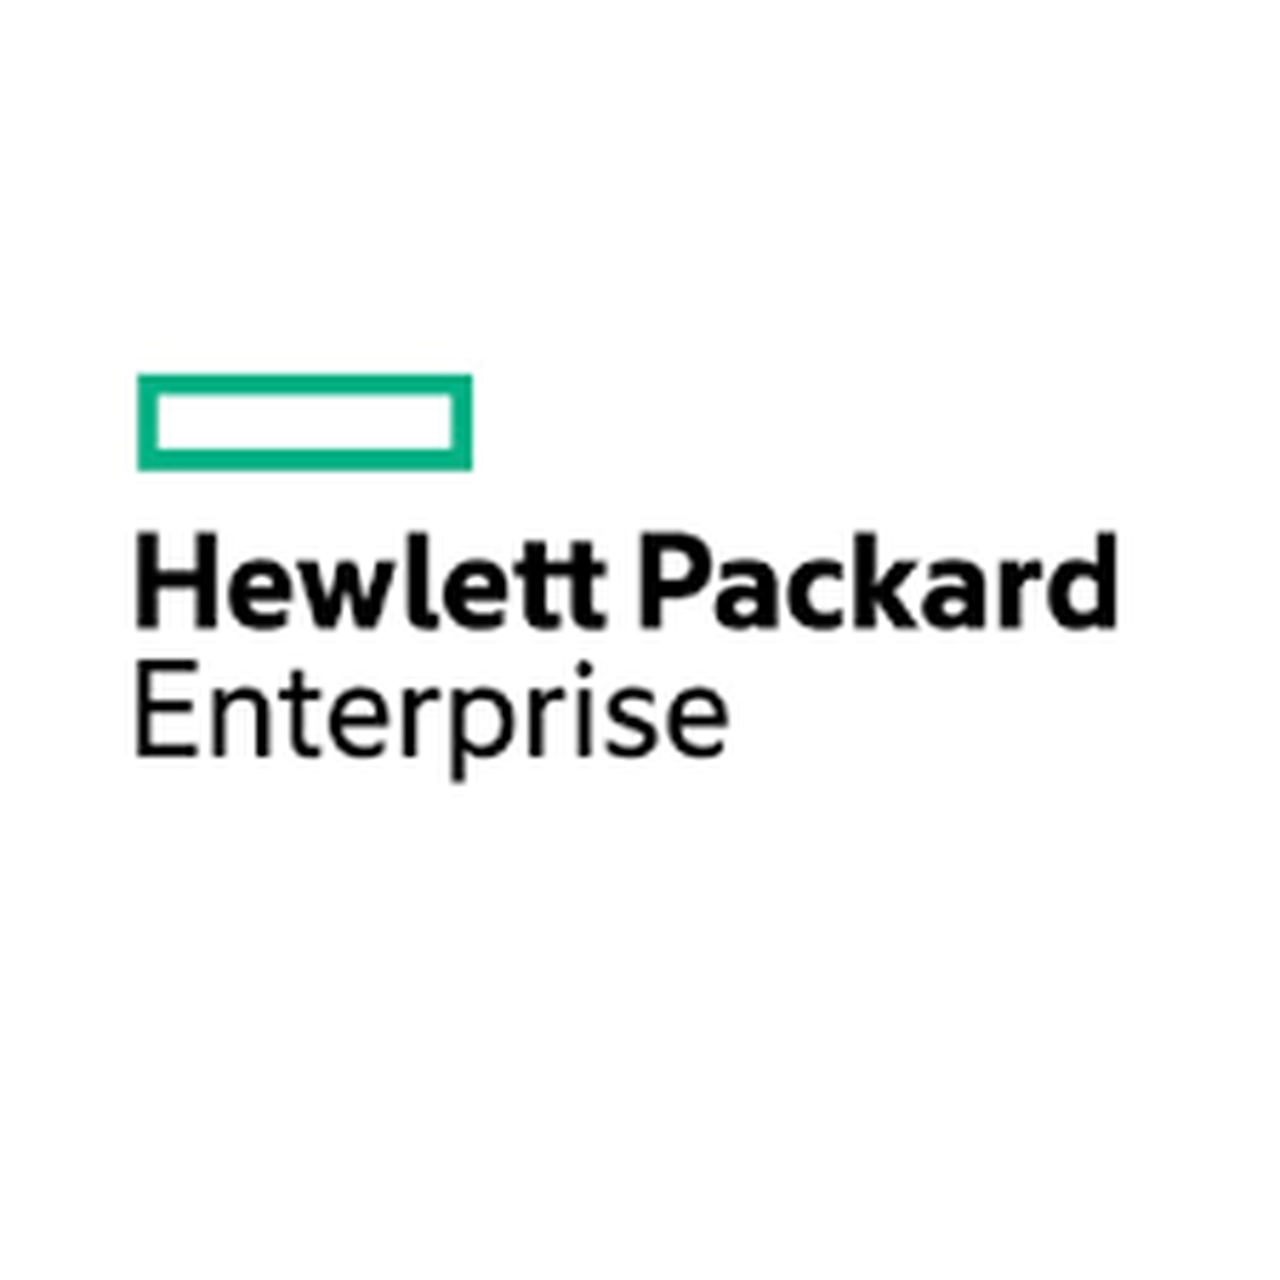 HPE Integrity BL860c Server Blade Factory integrated